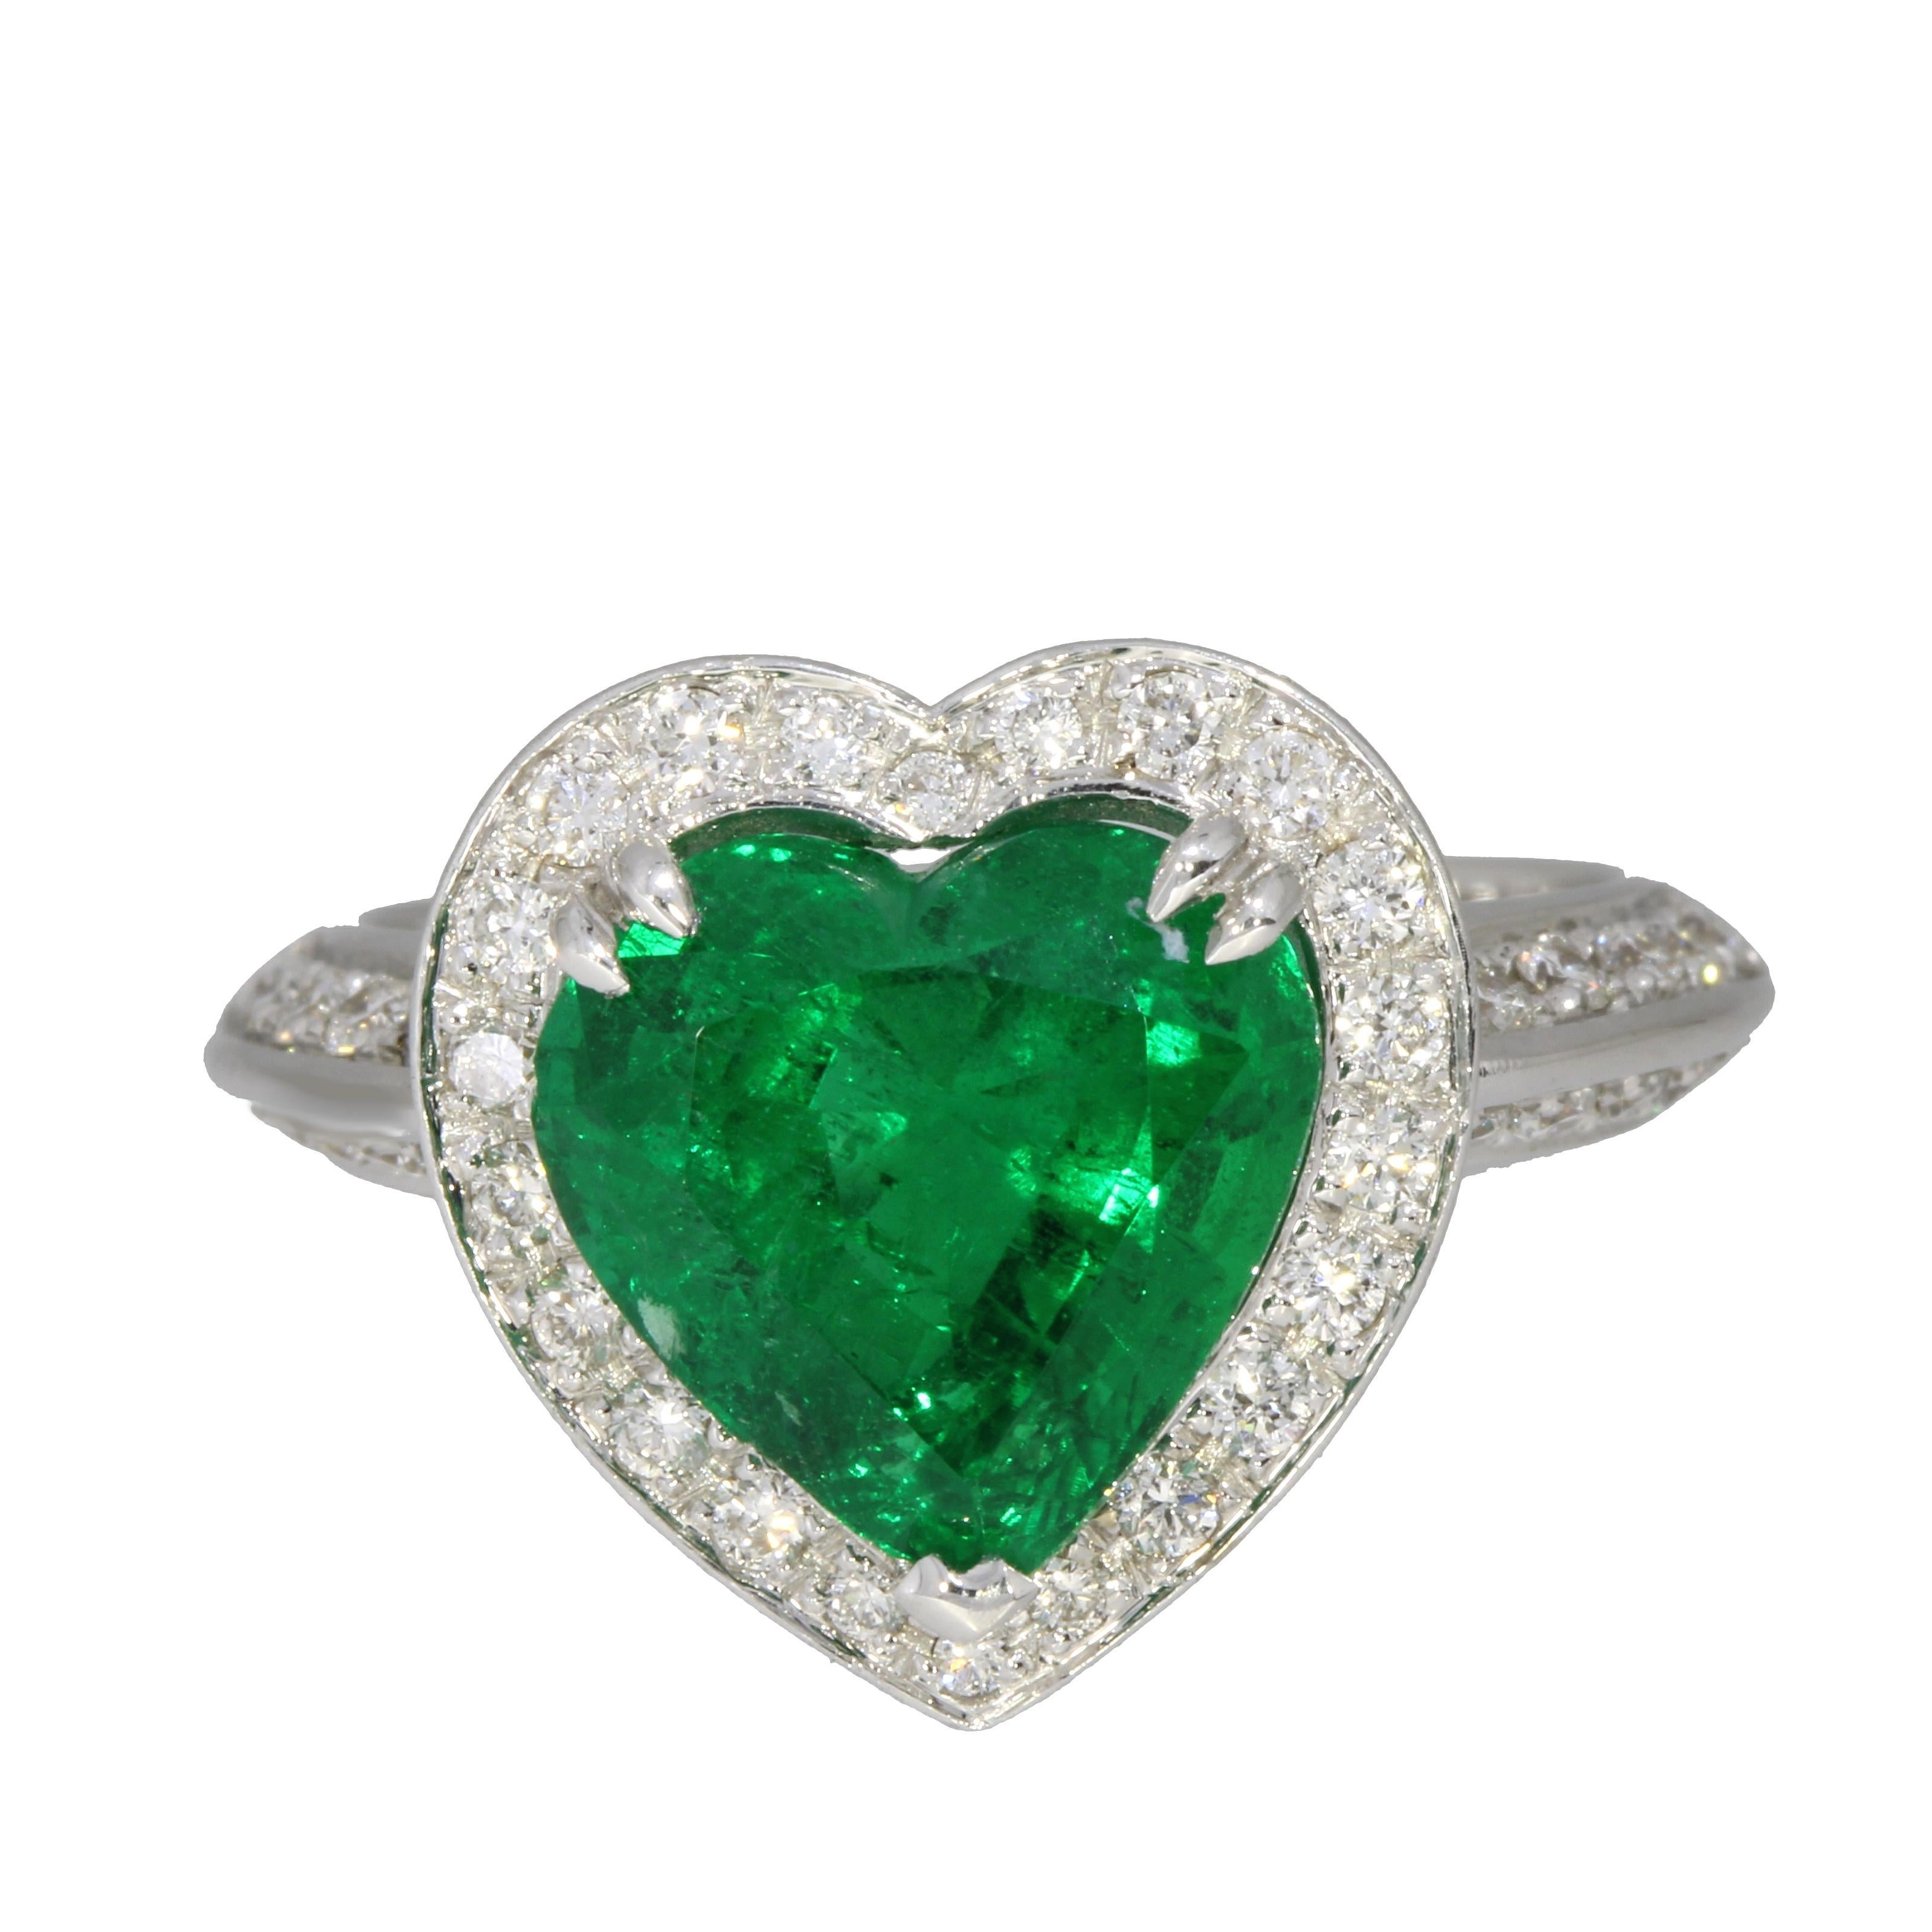 Certified Heart Cut Natural Emerald encircled by a delicate heart shaped row of brilliant cut white diamonds. 

- 18 Karat White Gold 
- 4.13 carats Heart Cut Natural Emerald Vivid Green CEE(O) Minor - GIL certified
- 0.80 carats White